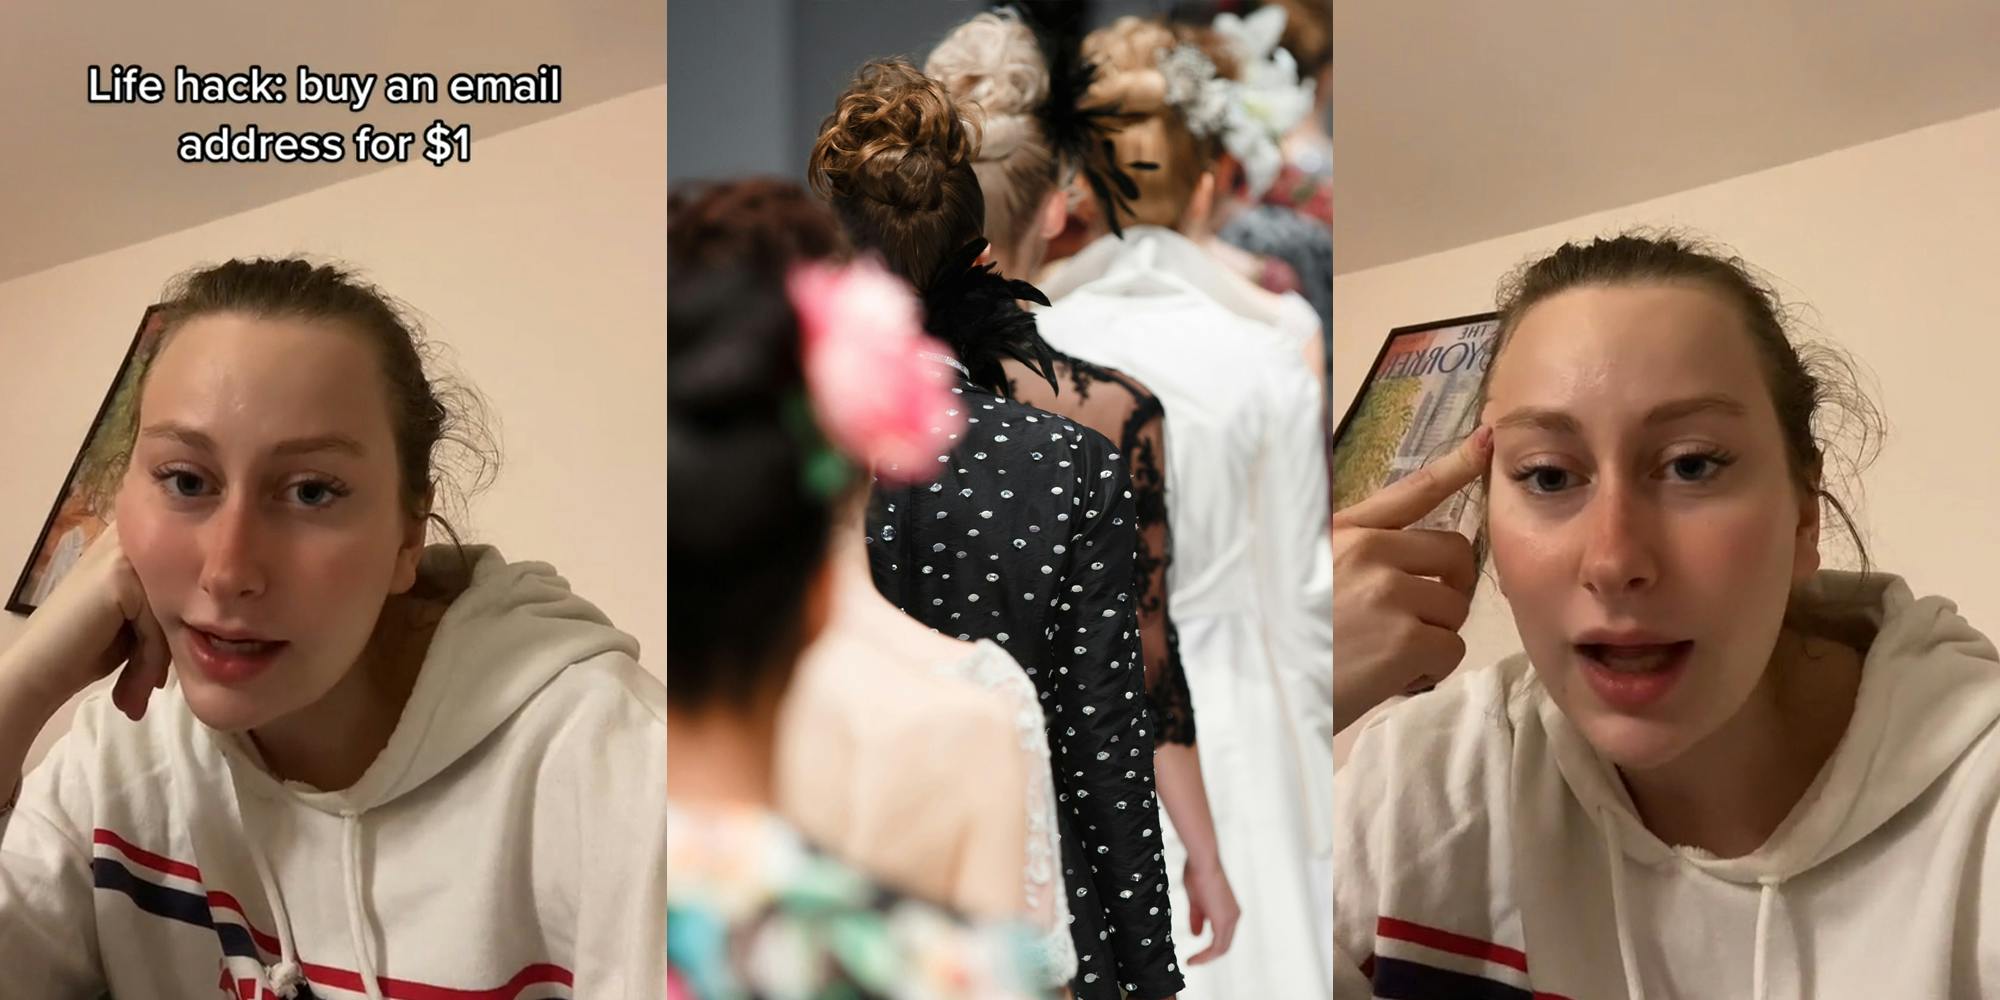 woman speaking with caption "Life hack: buy an email address for $1" (l) models walking in line on runway from behind (c) woman speaking with finger on forehead (r)